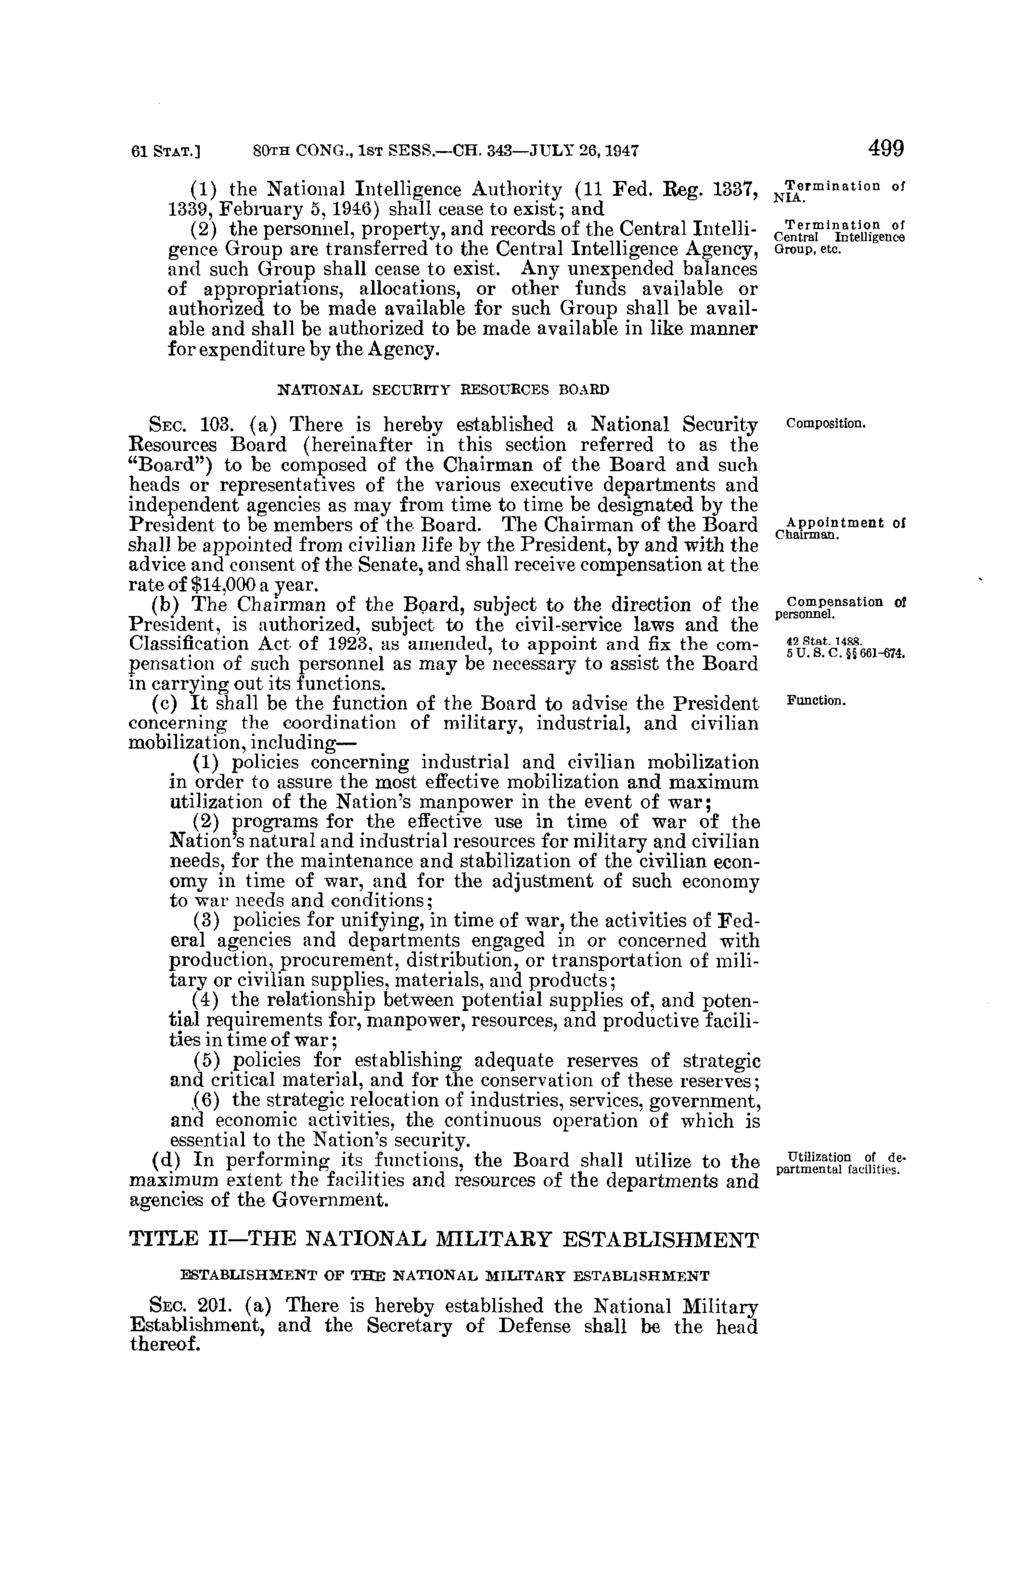 61 STAT.] SOin CONG., 1ST SESS.-CH. 343-JULY 26,1947 (1) the National Intelligence Authority (11 Fed. Reg.